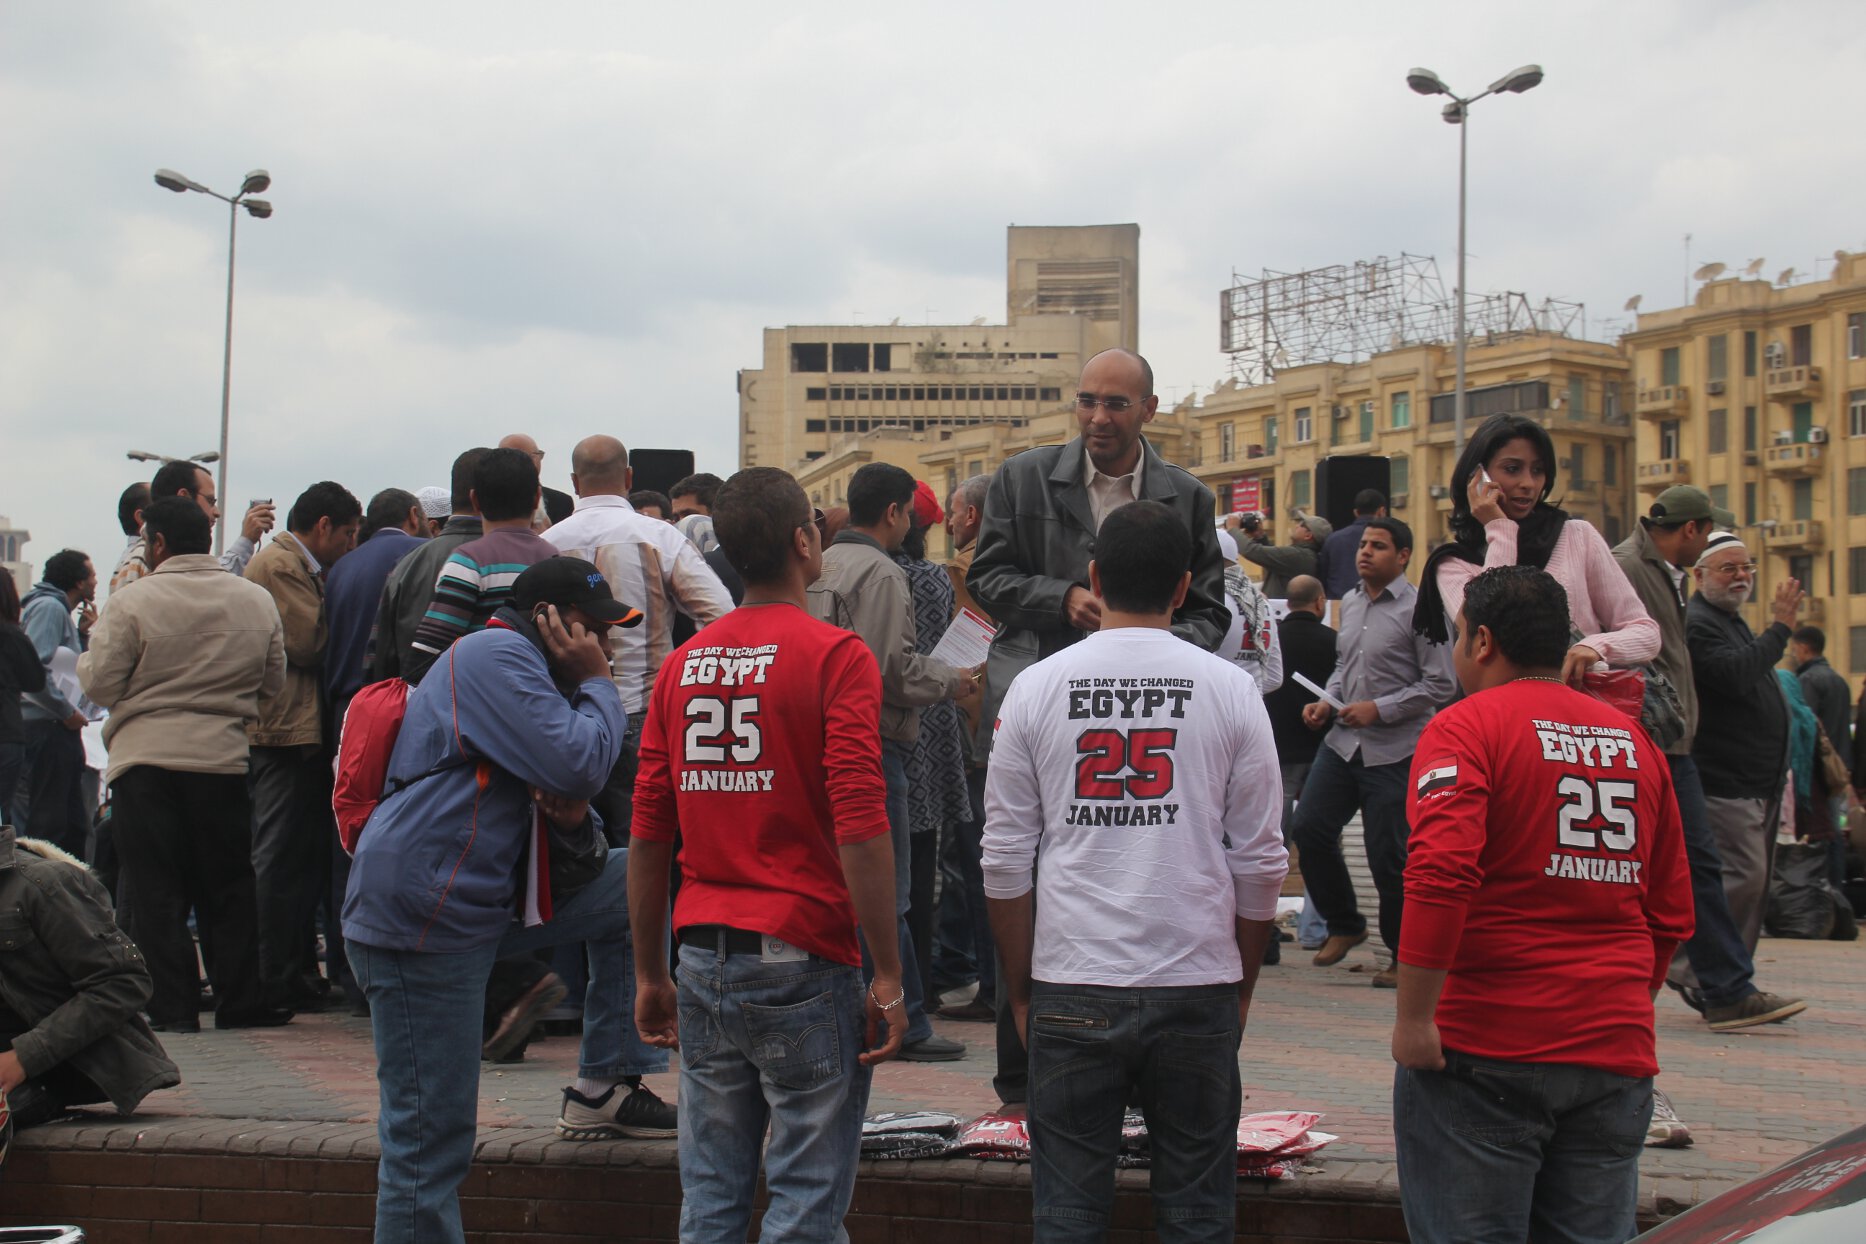 Demonstrators sell &quot;The Day We Changed&quot; T-shirts while protesters gather in Cairo&#039;s Tahrir Square.